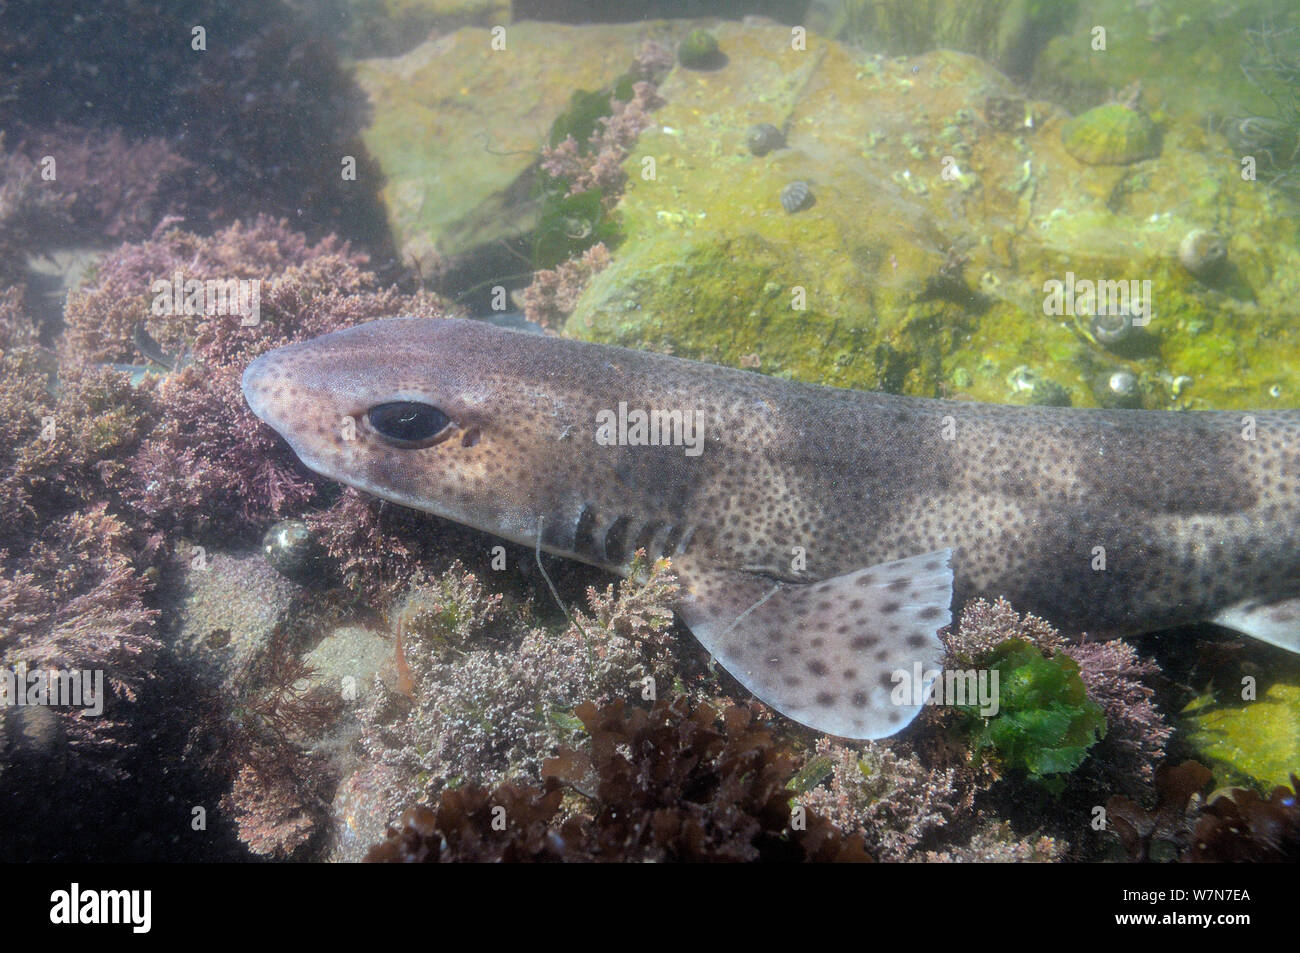 Close up of Lesser spotted catshark / Dogfish (Scyliorhinus canicula) resting on floor of a rockpool among Coralweed (Corallina officinalis) low on the shore. Rhossili, The Gower peninsula, UK, July. Stock Photo